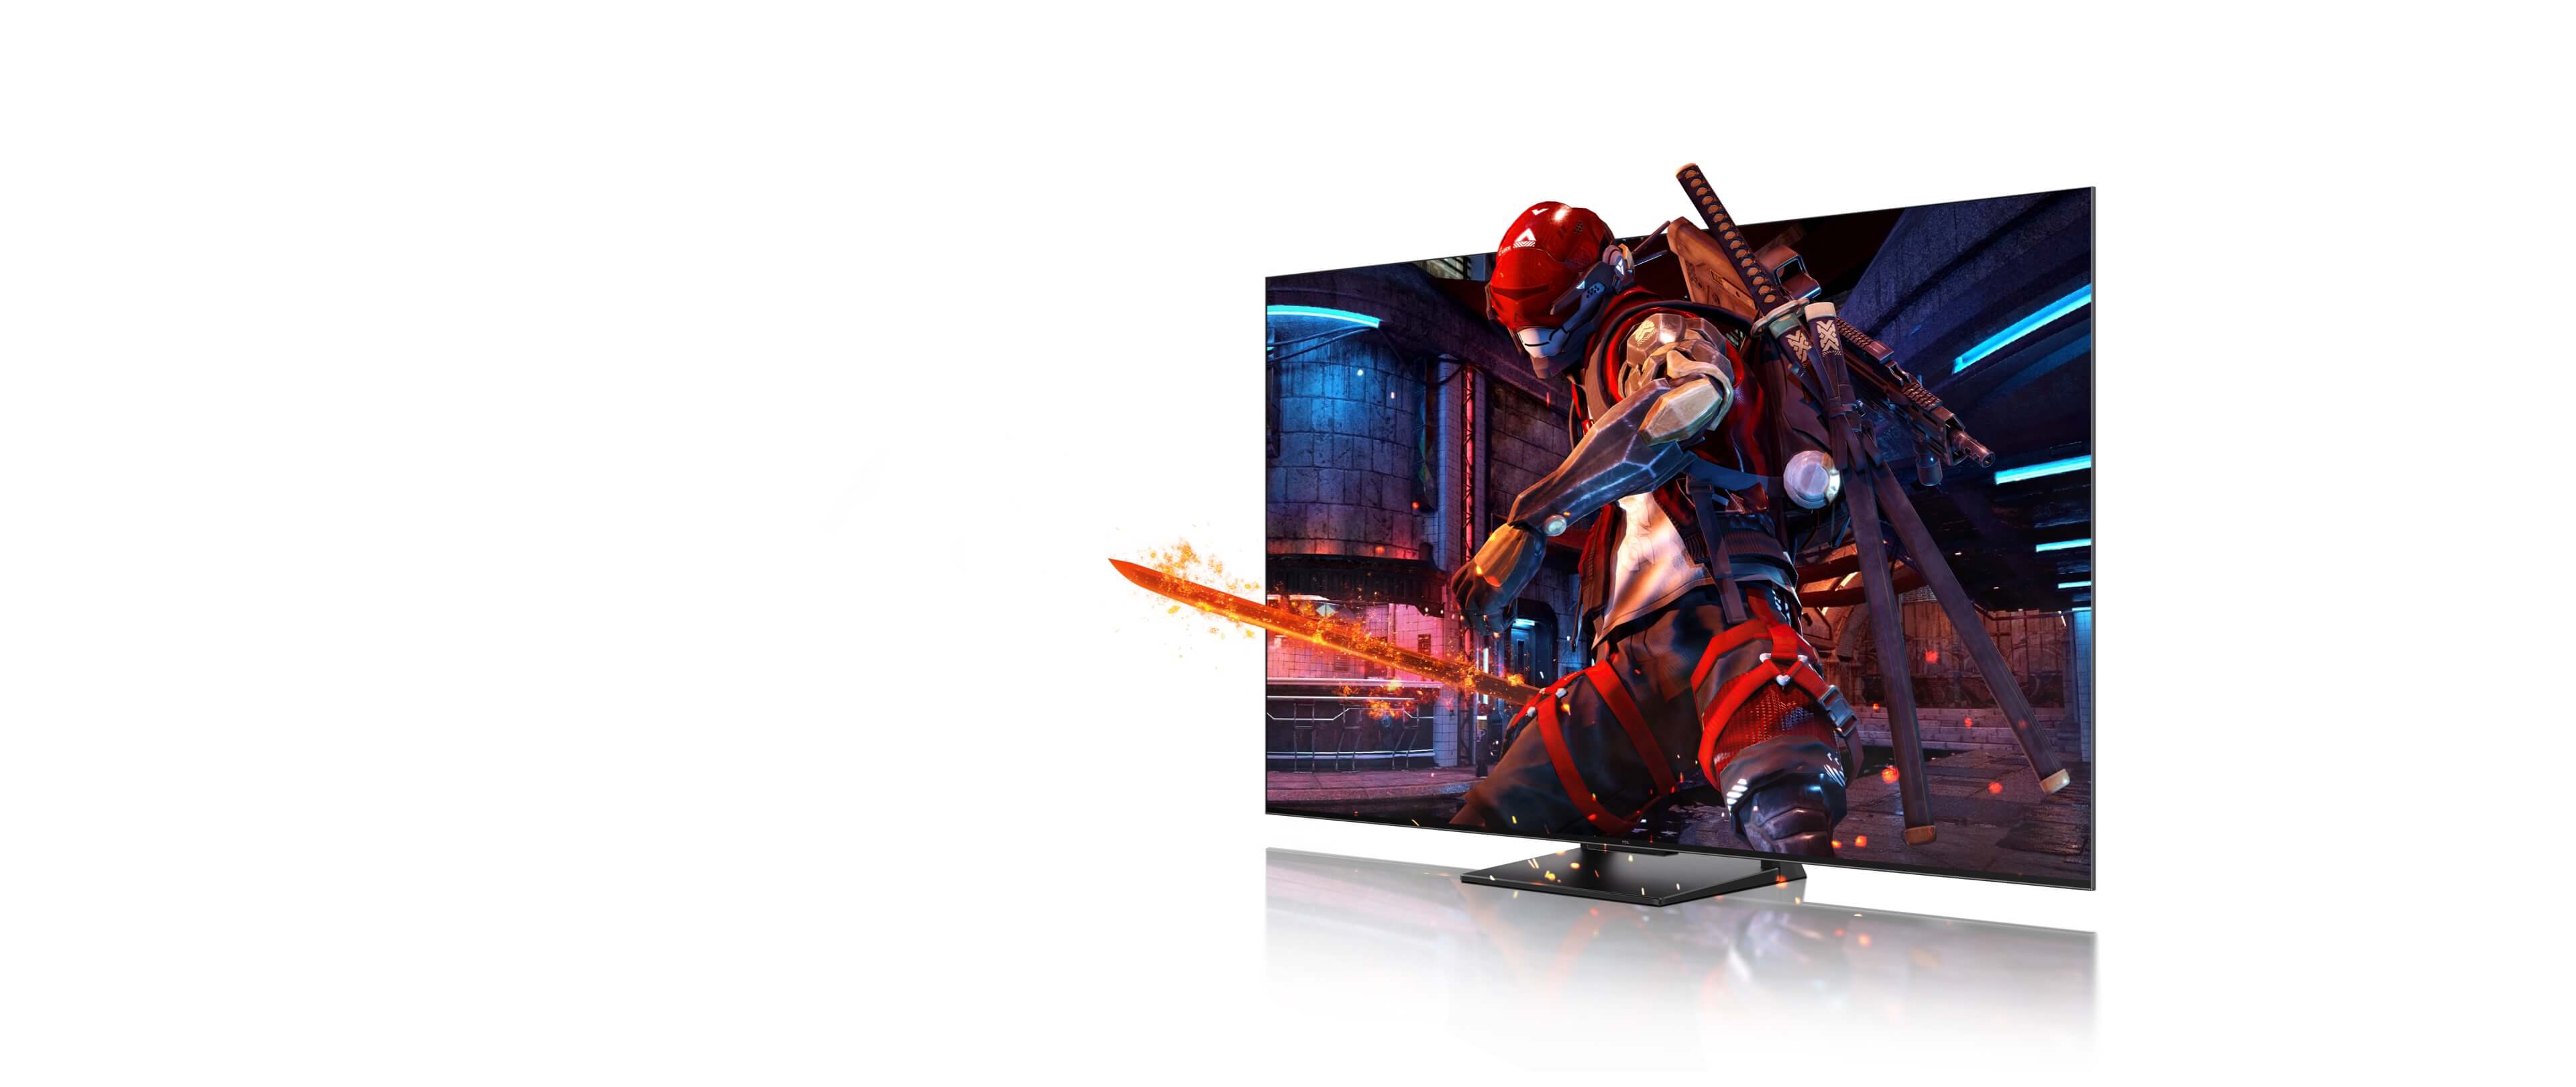 TCL 4K QLED TV and<br>Game Master Pro 2.0